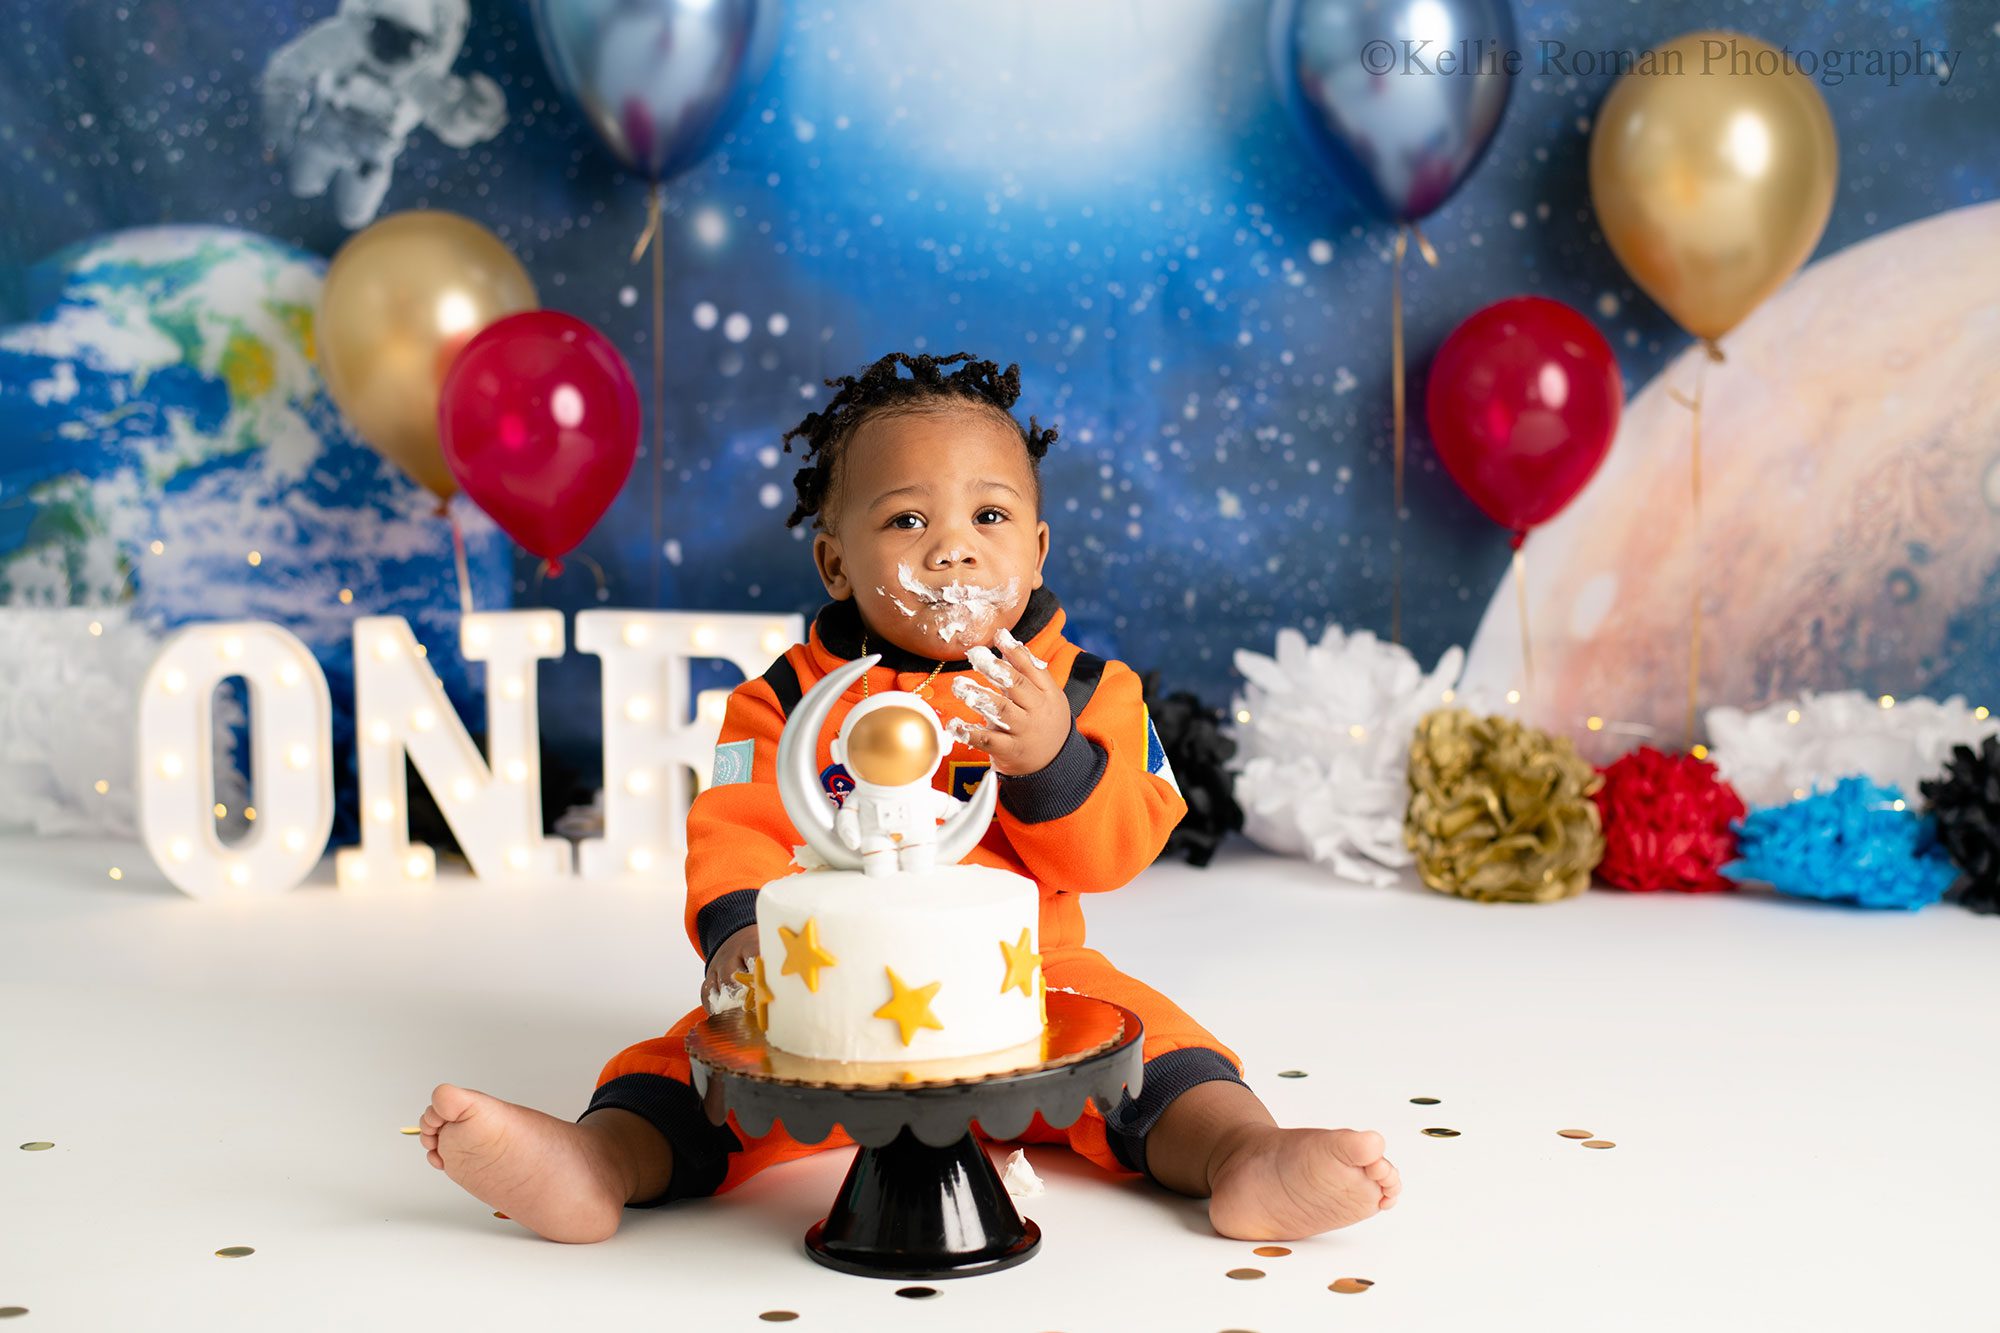 milwaukee cake smash pics. one year old boy is dresses in an orange astronaut onesie sitting behind a white cake with gold stars and a spaceman on a moon cake topper. the backdrop is blues with white stars and blue gold and red balloons. there is a white marquee light that spells out one. the boy has frosting on his face and on his hands.